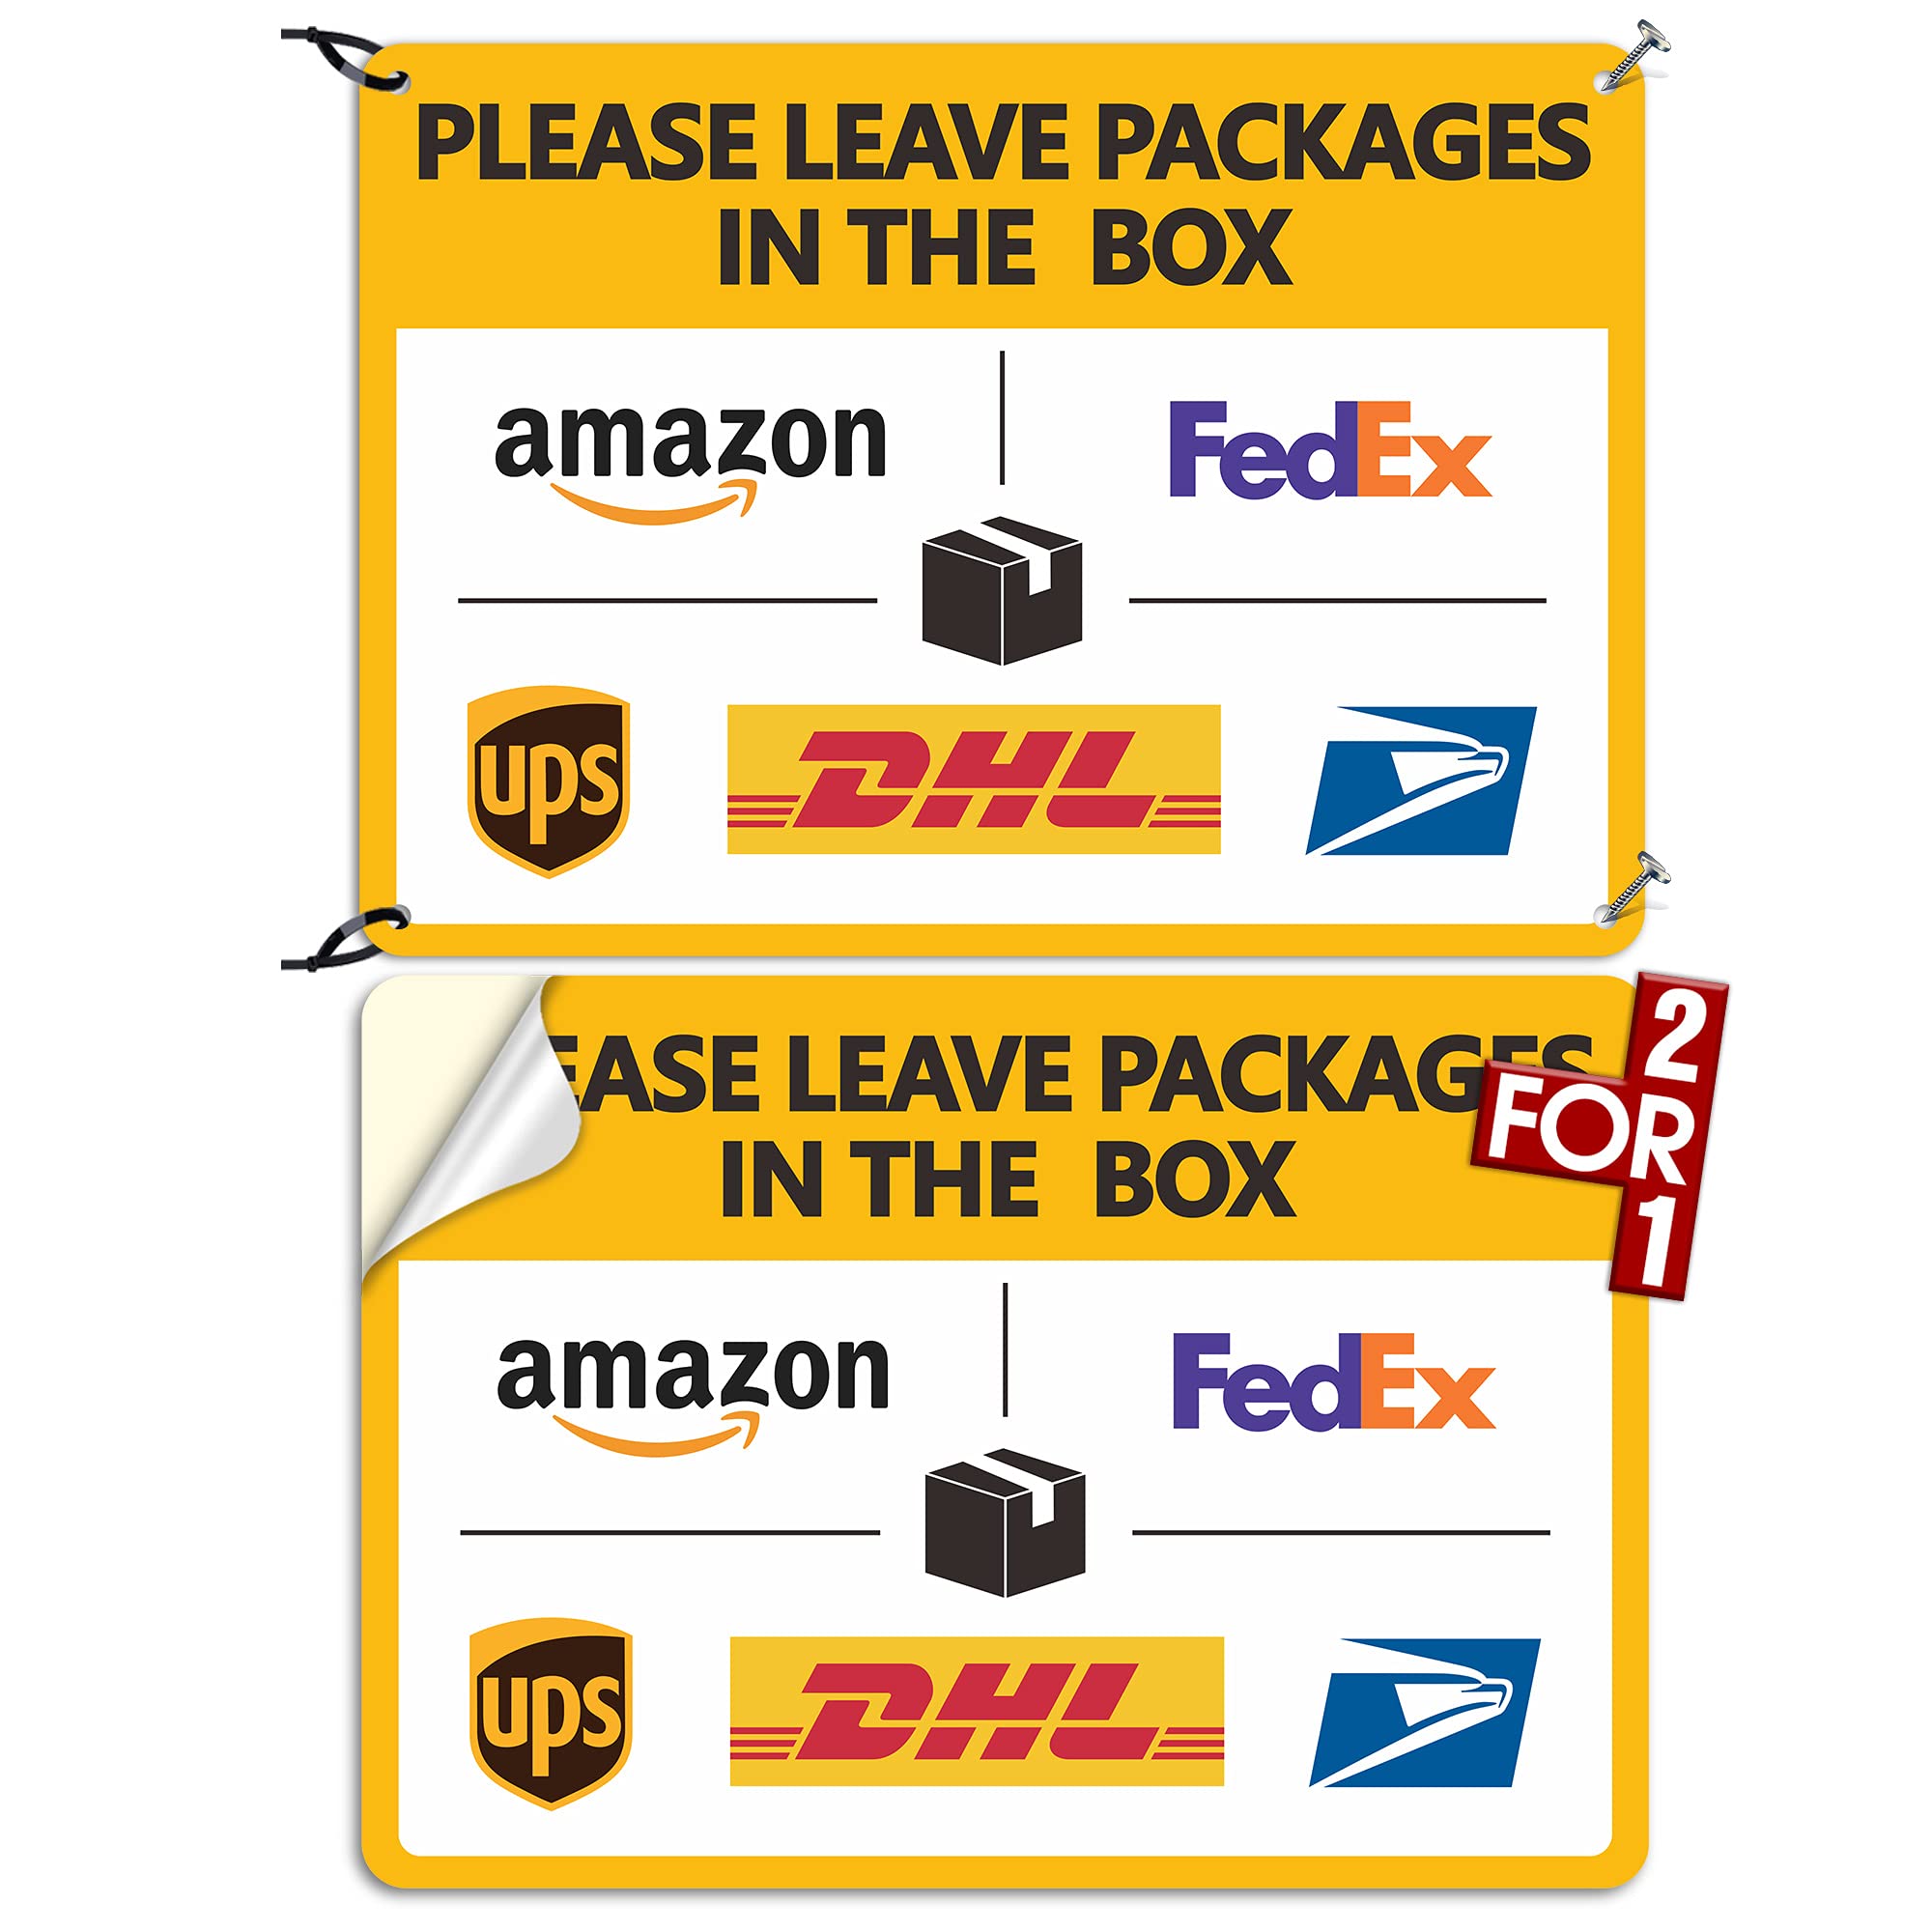 Package Delivery Sign Delivery Instructions Sign 2 Pack Leave Packages in The Box Sign,Two For One : 1 Pcs Super Tough PVC+1 Pcs Self Adhesive Vinyl, Rust-Free, Weather-Proof